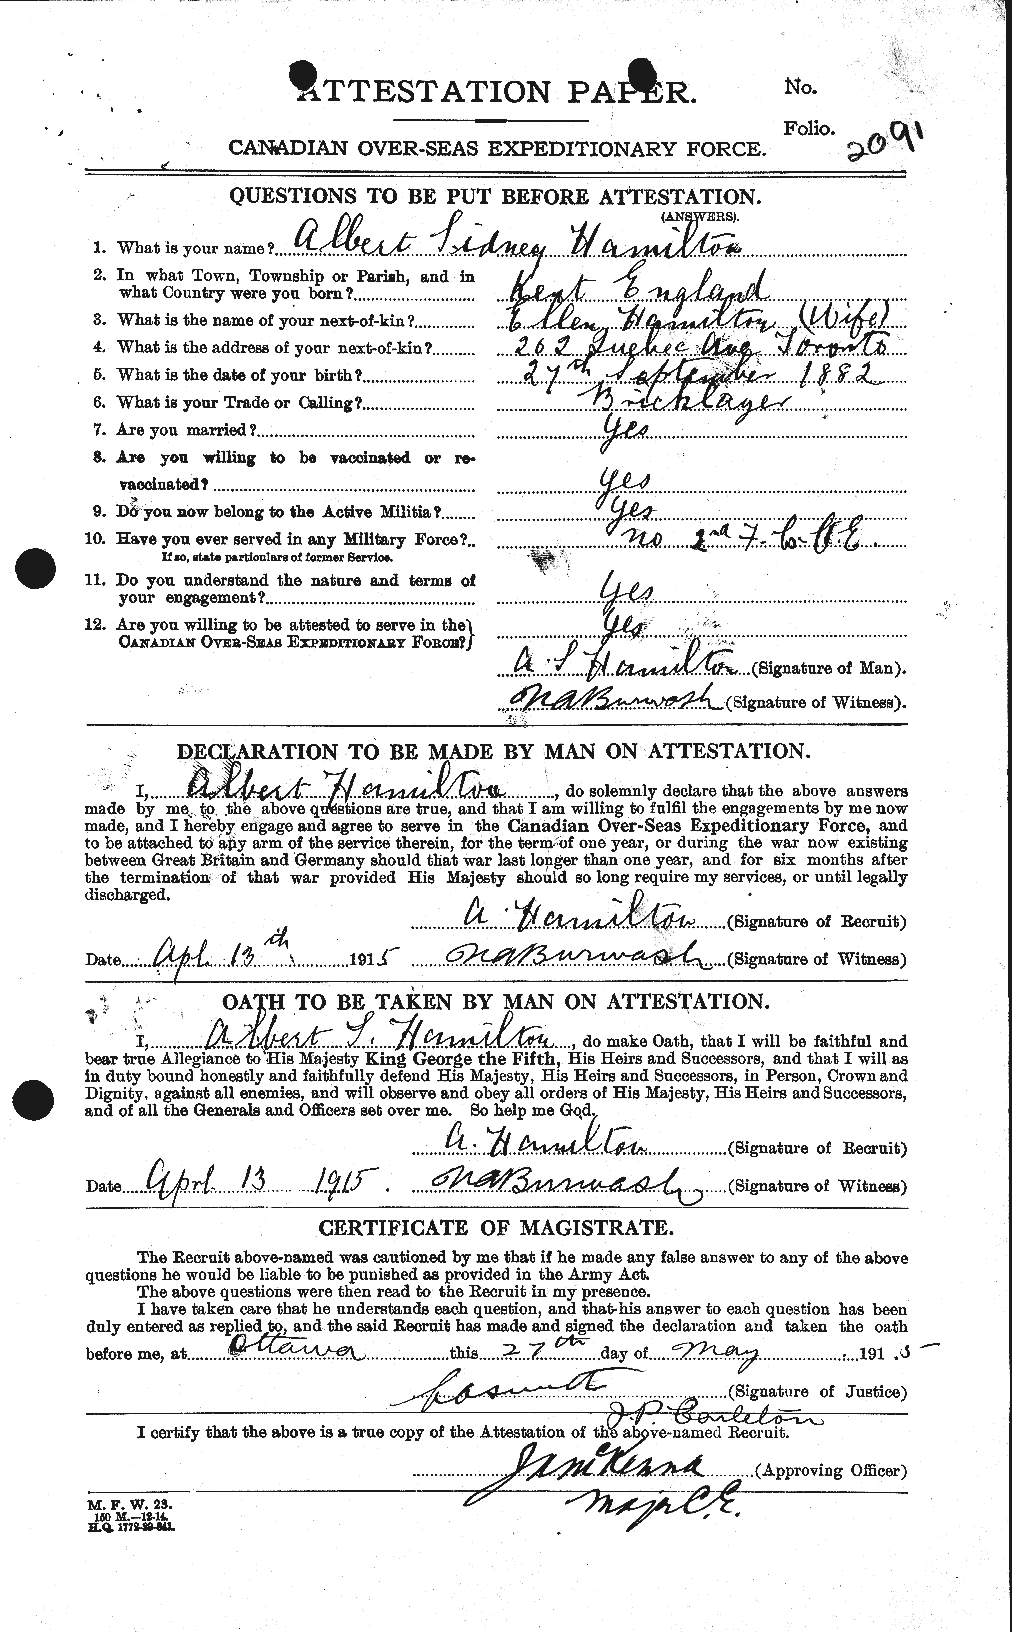 Personnel Records of the First World War - CEF 375185a